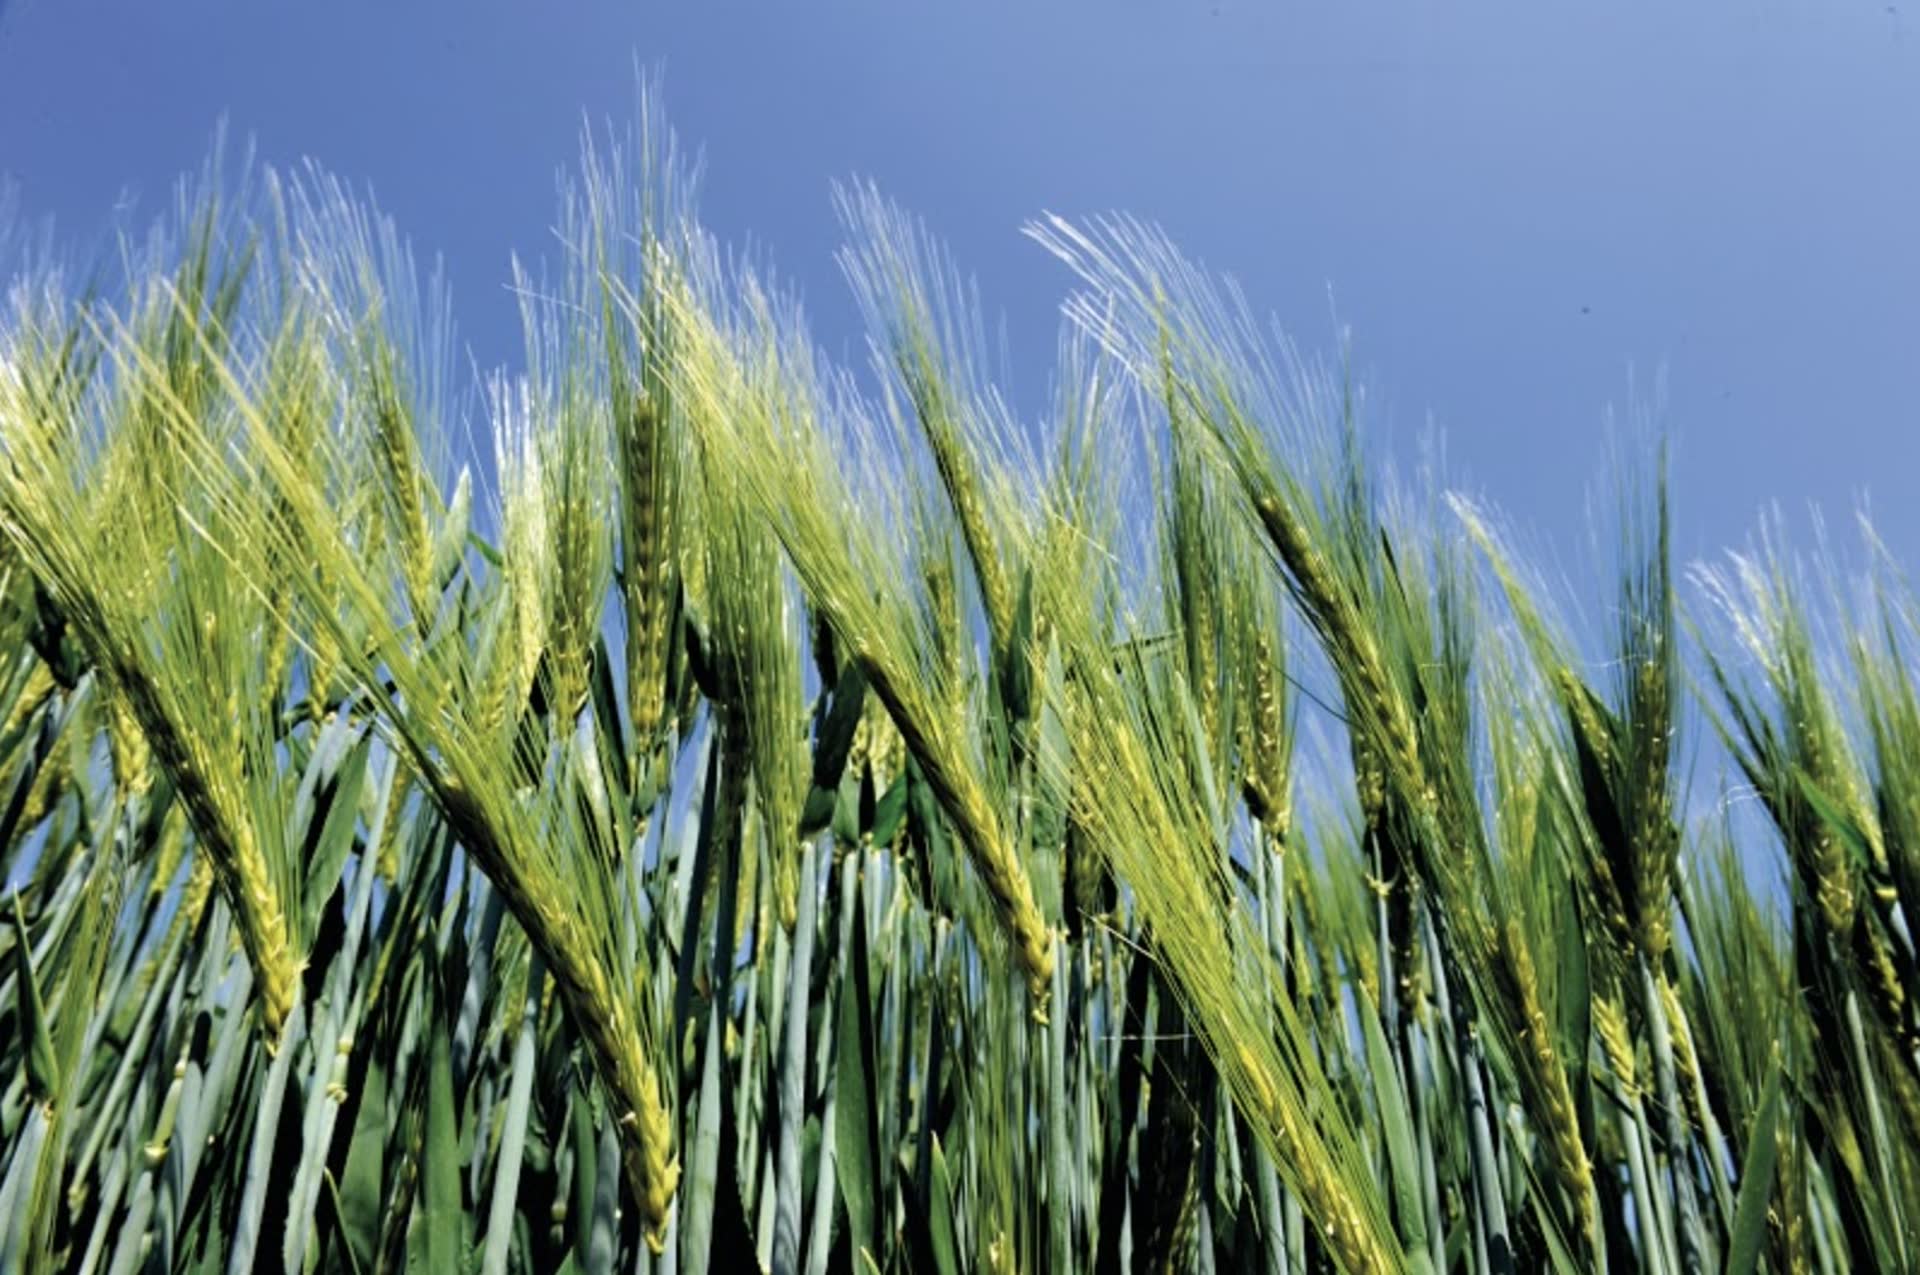 Guarantee the quality of our malting barley varieties